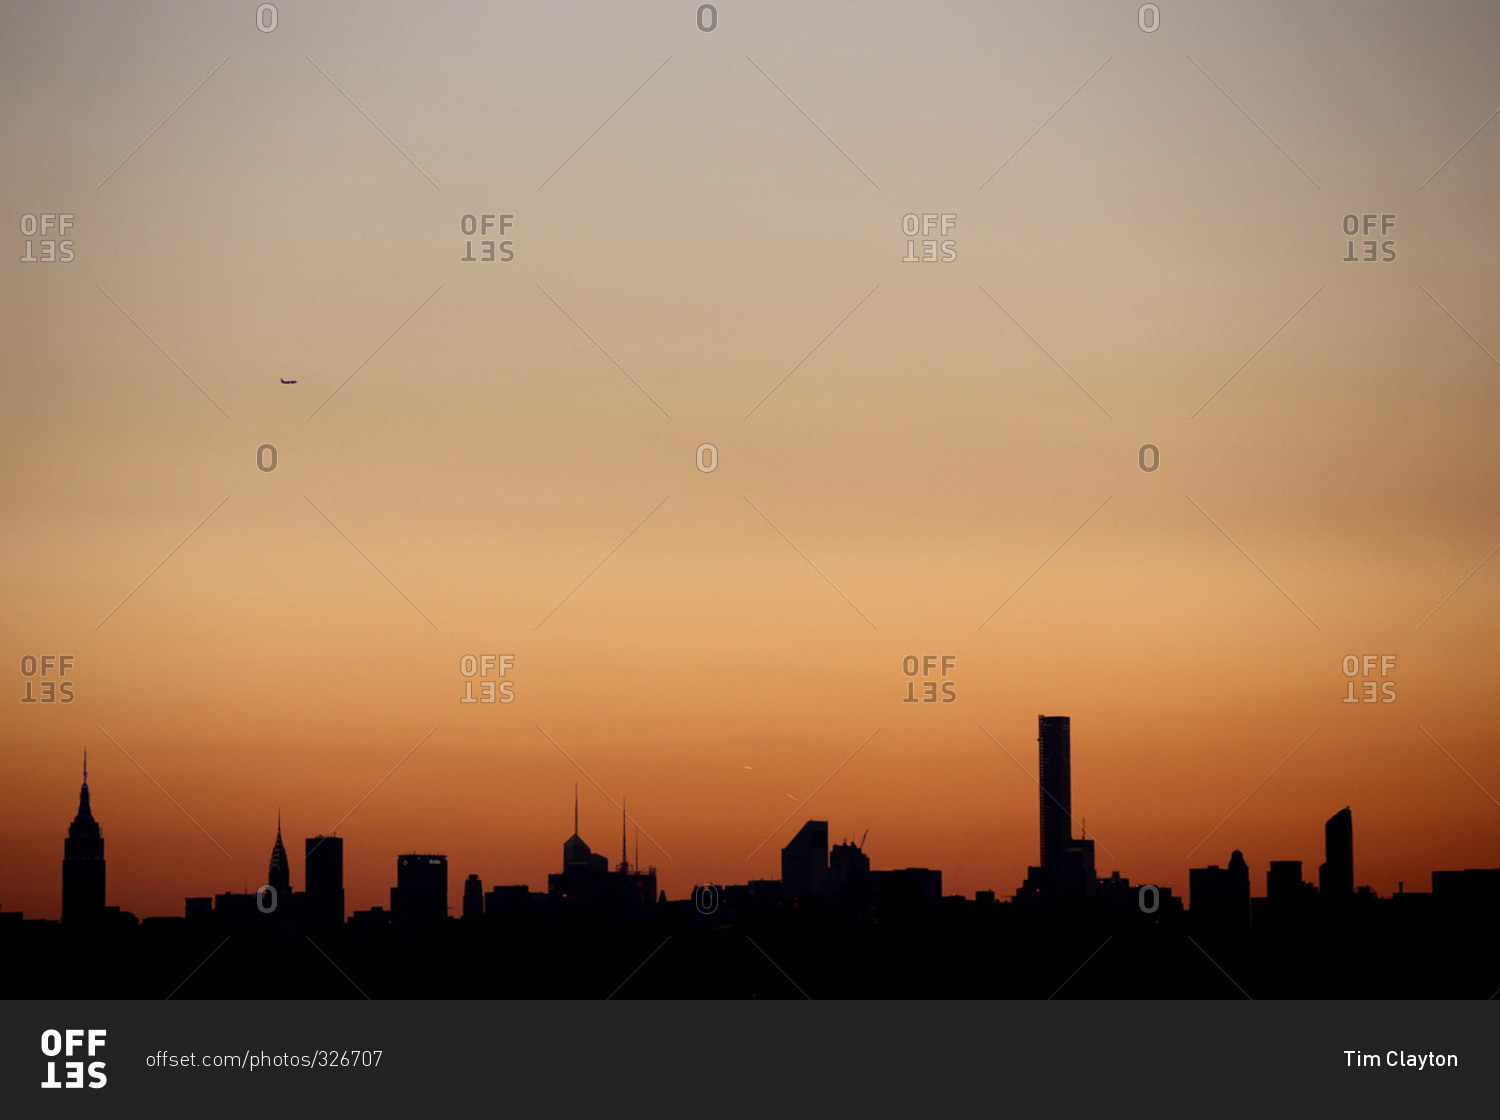 The sun setting in the Manhattan skyline in New York City viewed from Flushing, Queens, New York